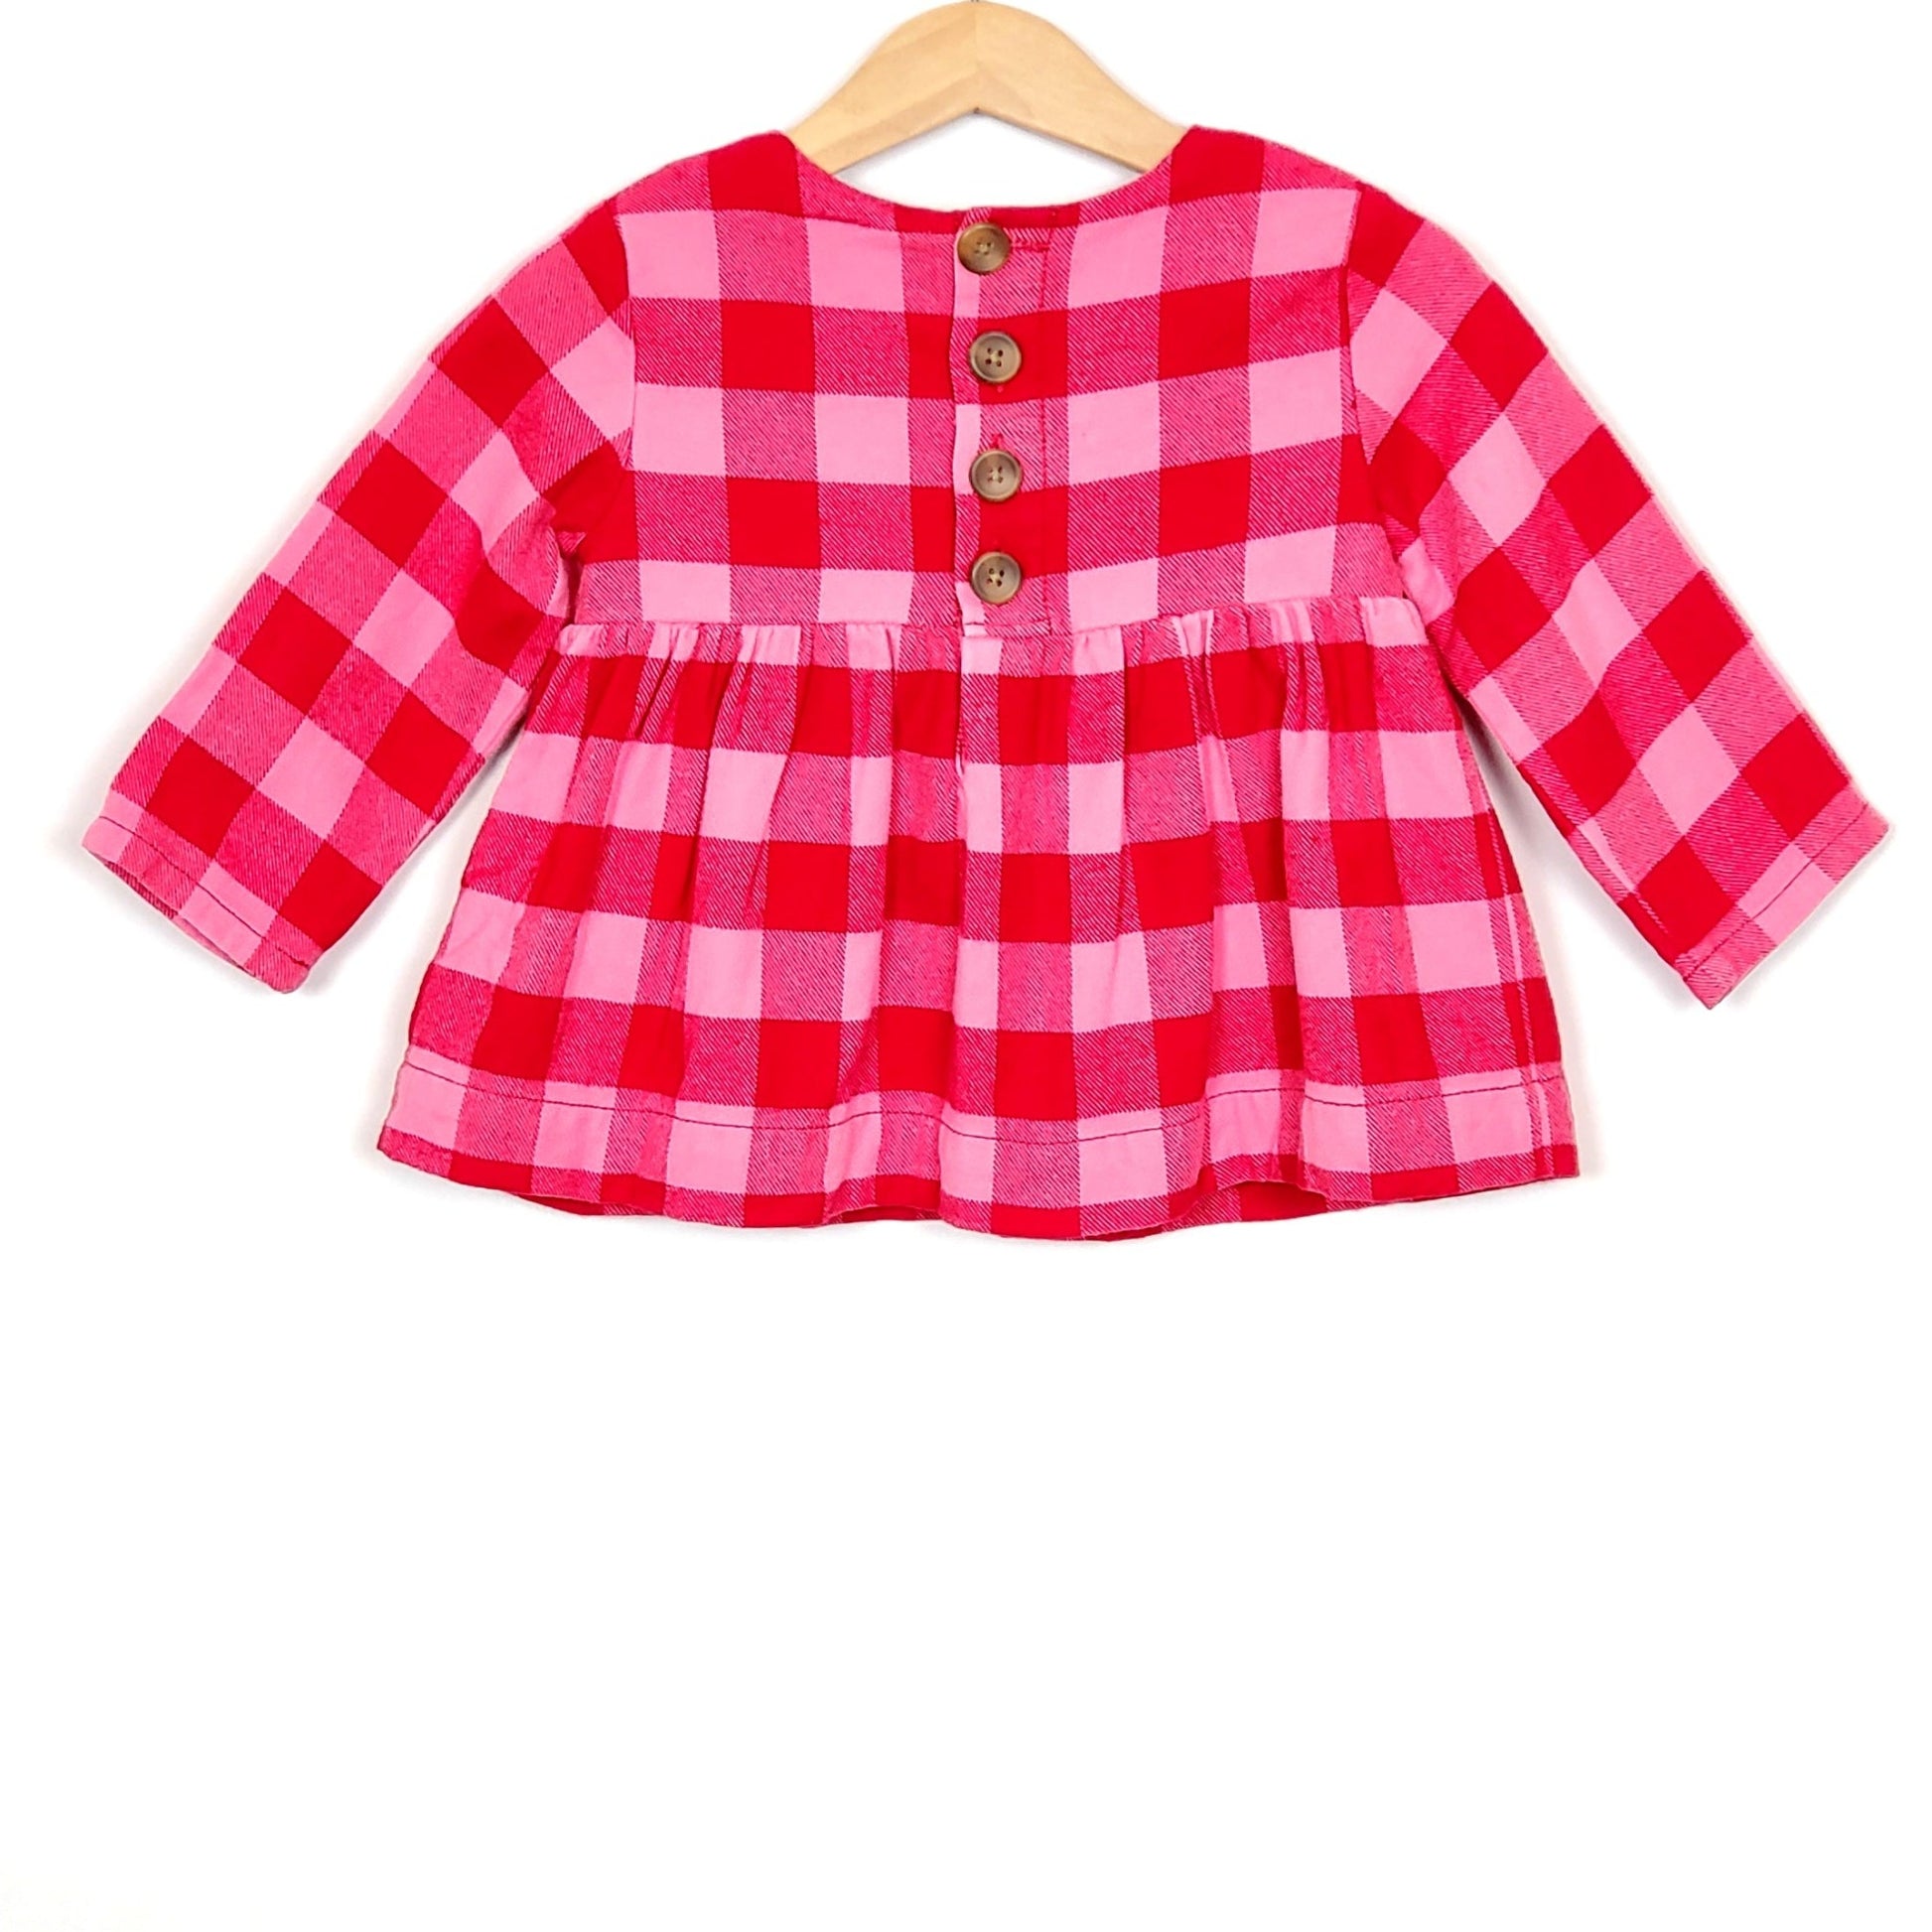 Hanna Andersson Girls Pink Red Plaid Top 18M Used View 2